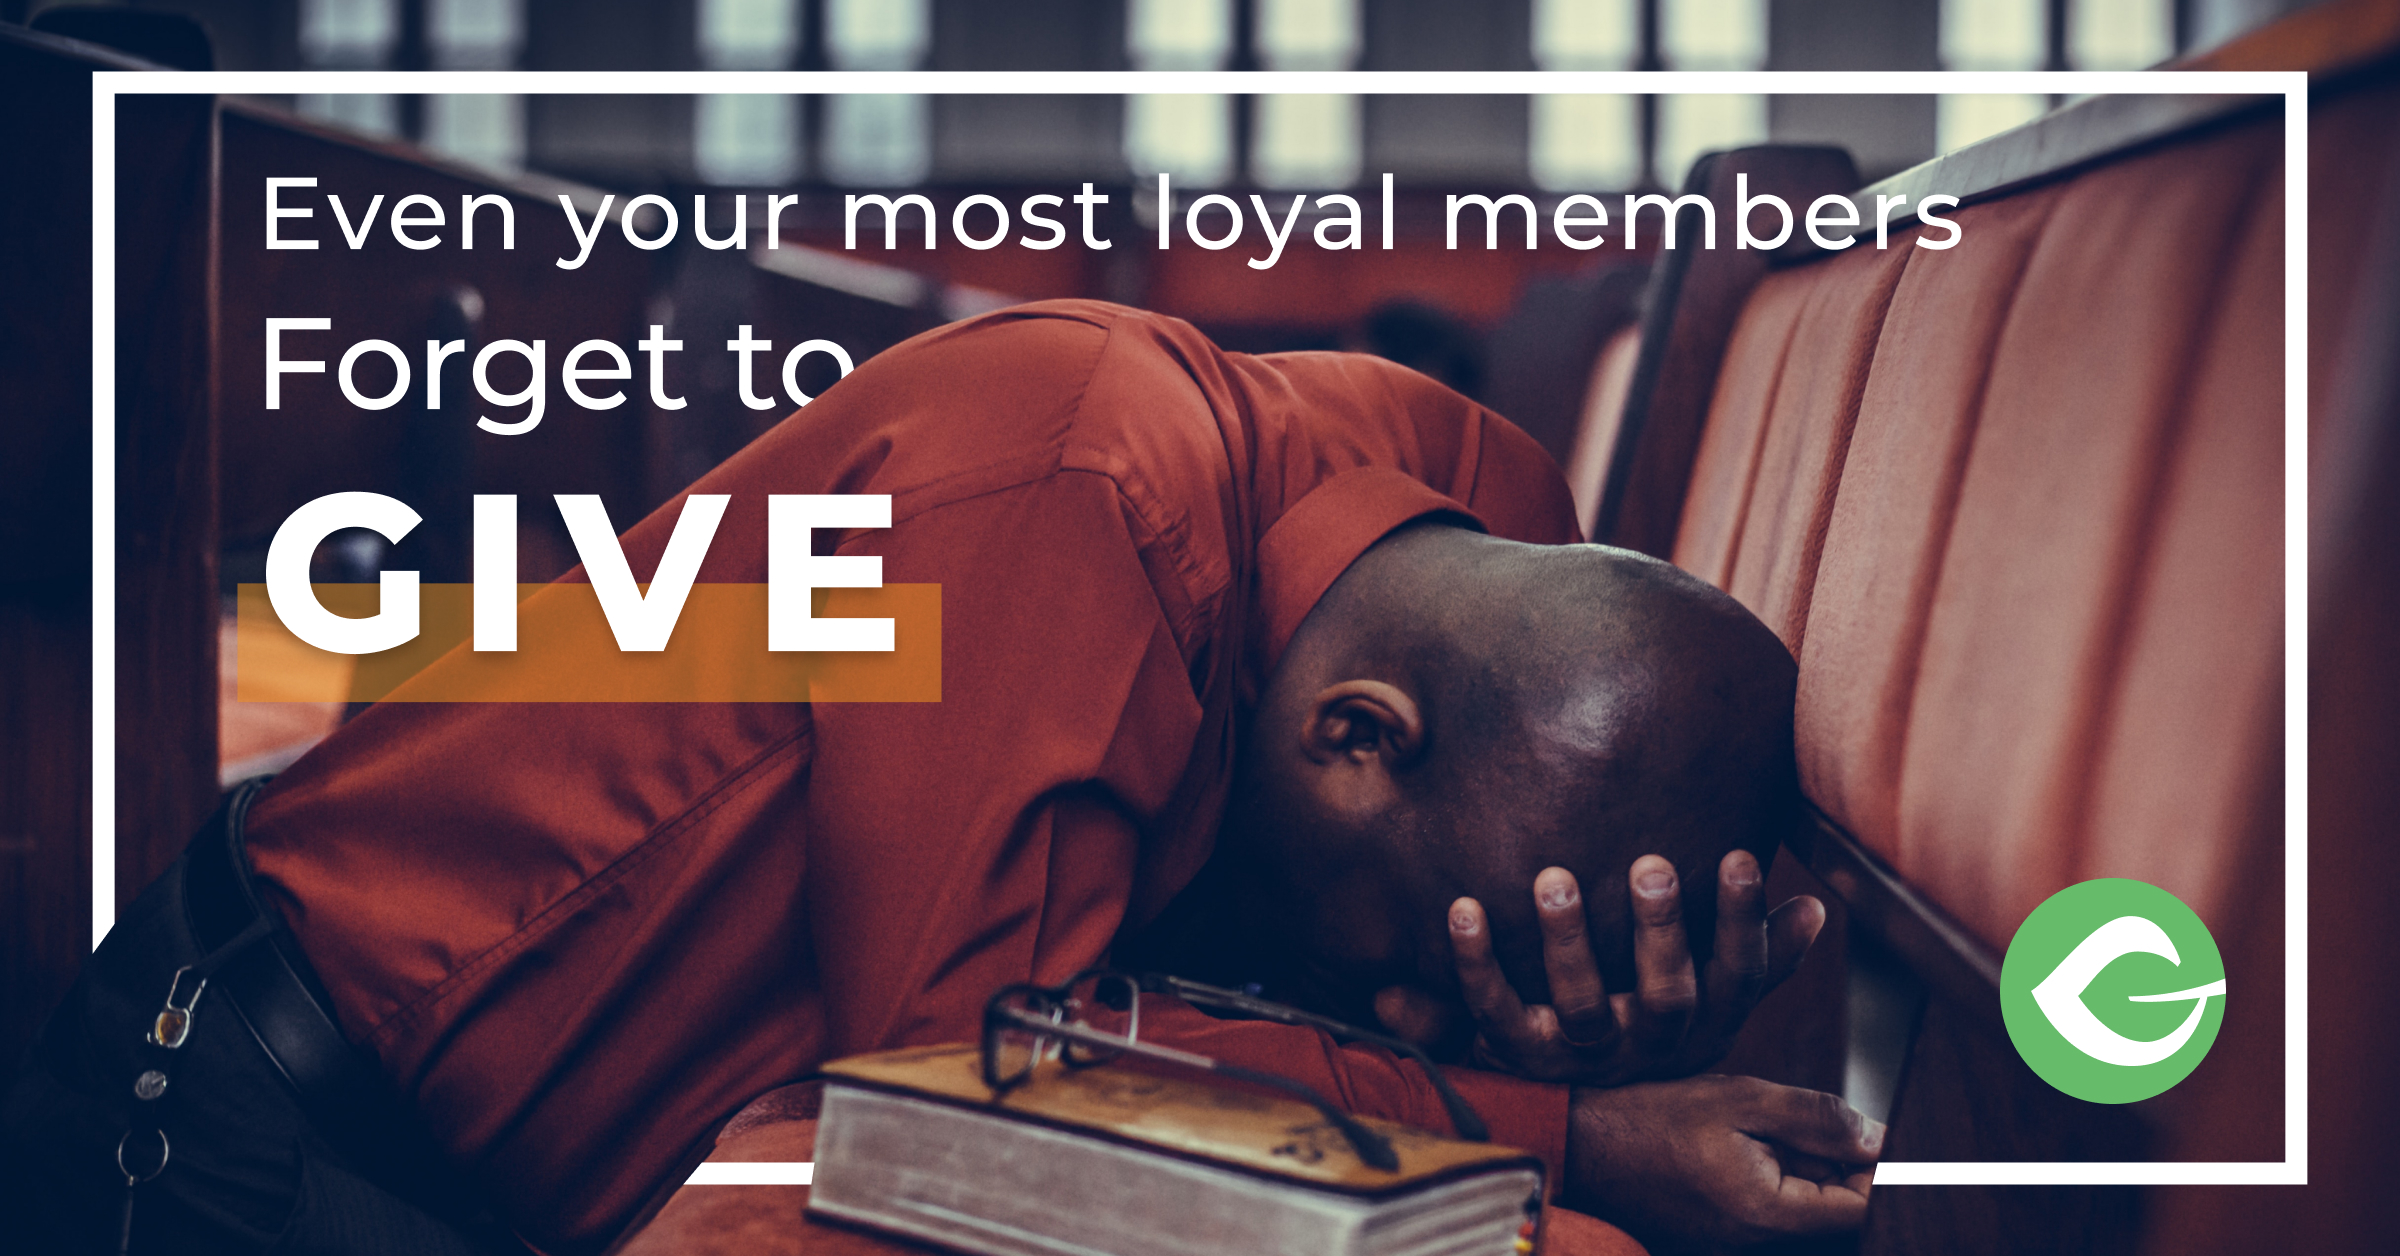 Even your most loyal members forget to give which can be stressful as depicted by a man with his head in his hands. Learn how to set up online giving for your church to help them automate the process.